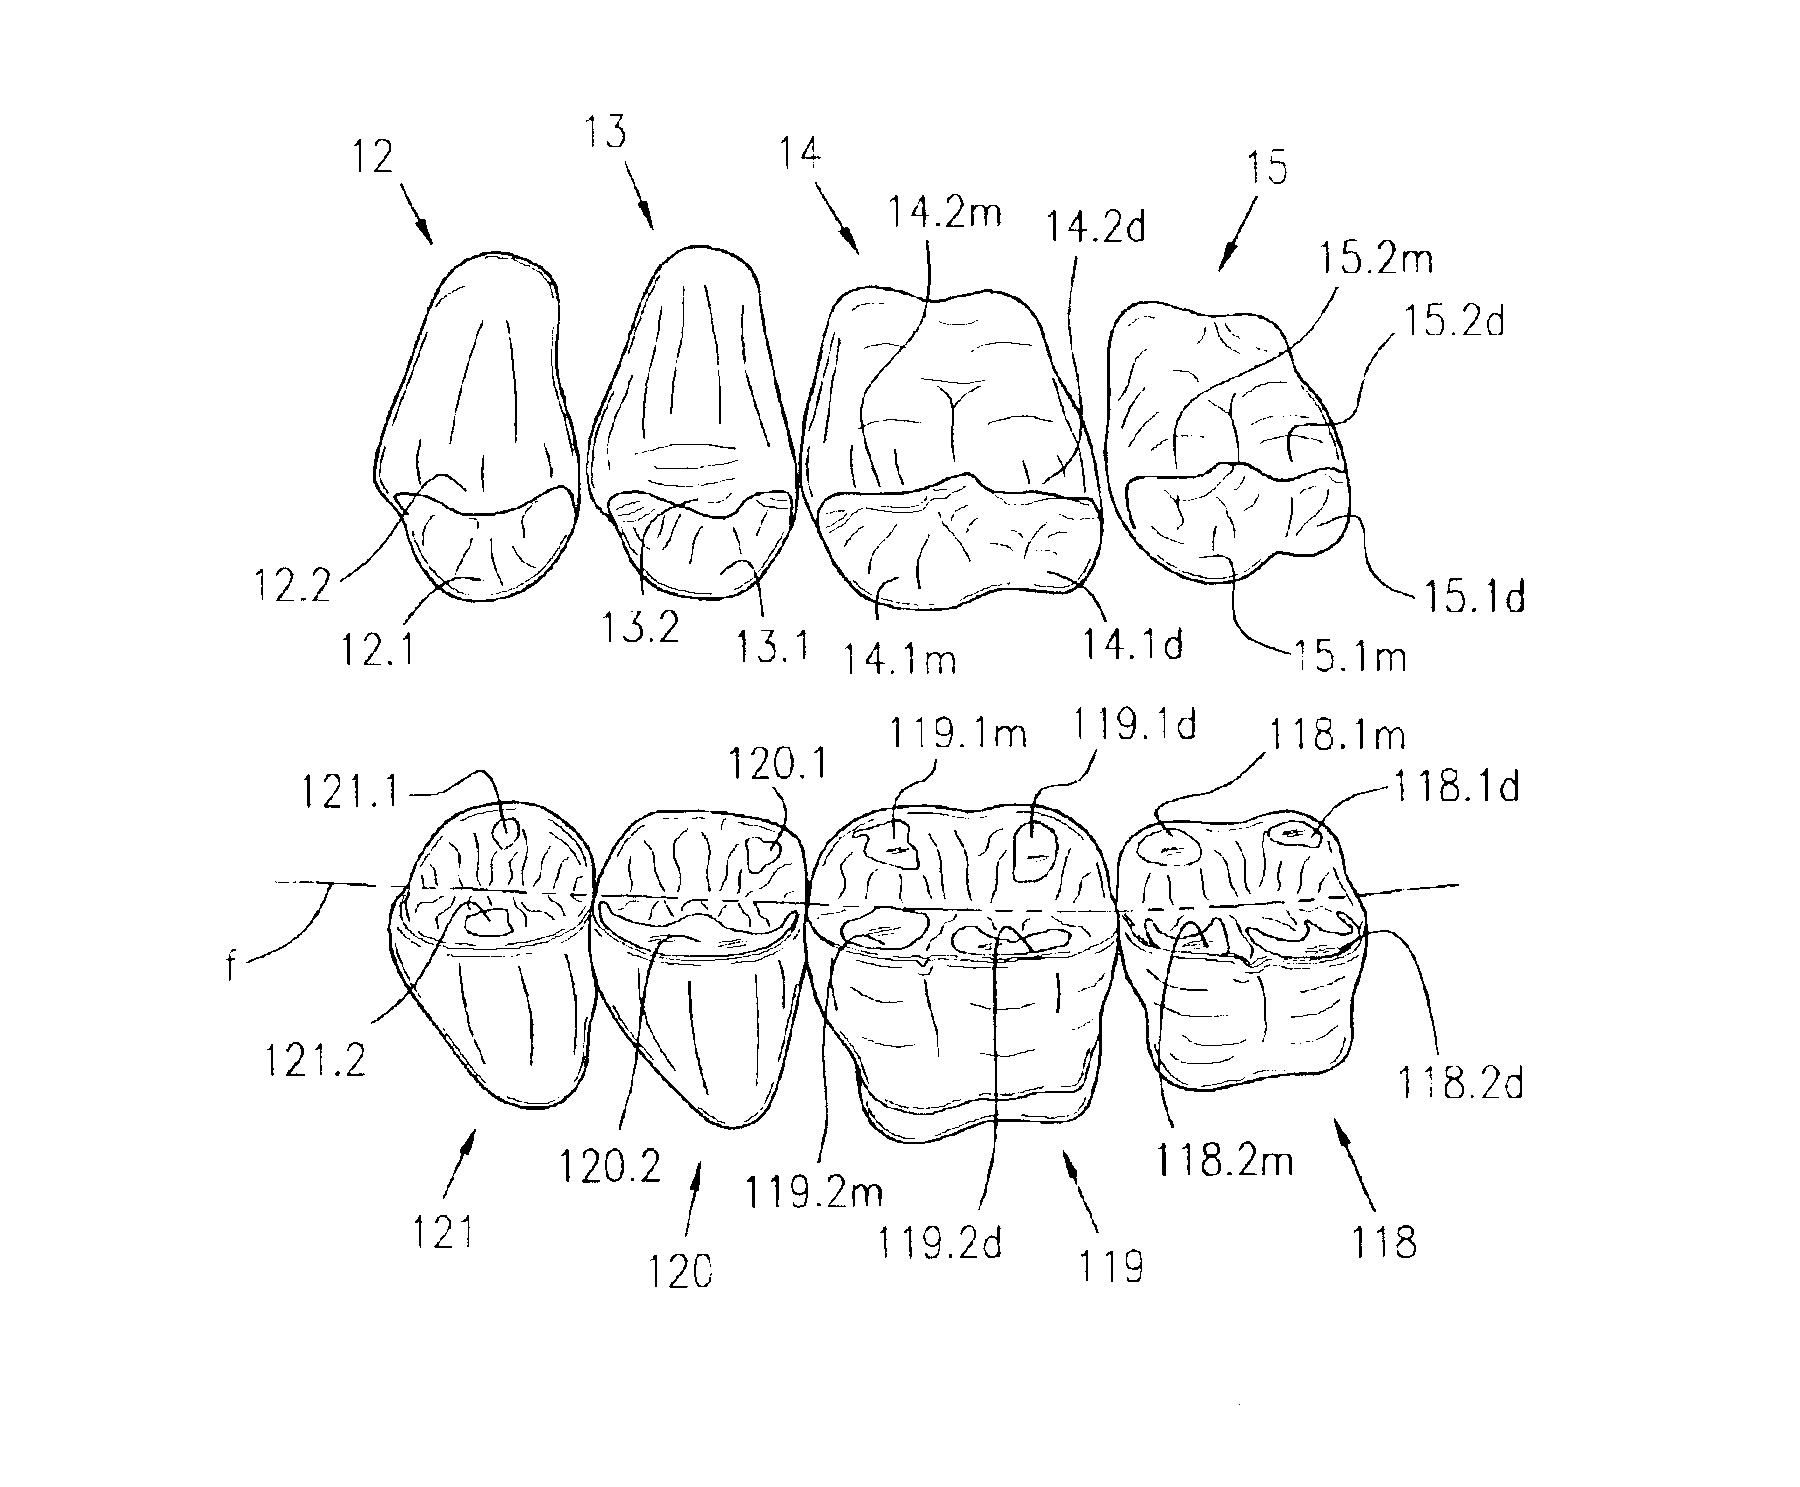 Sets of posterior teeth